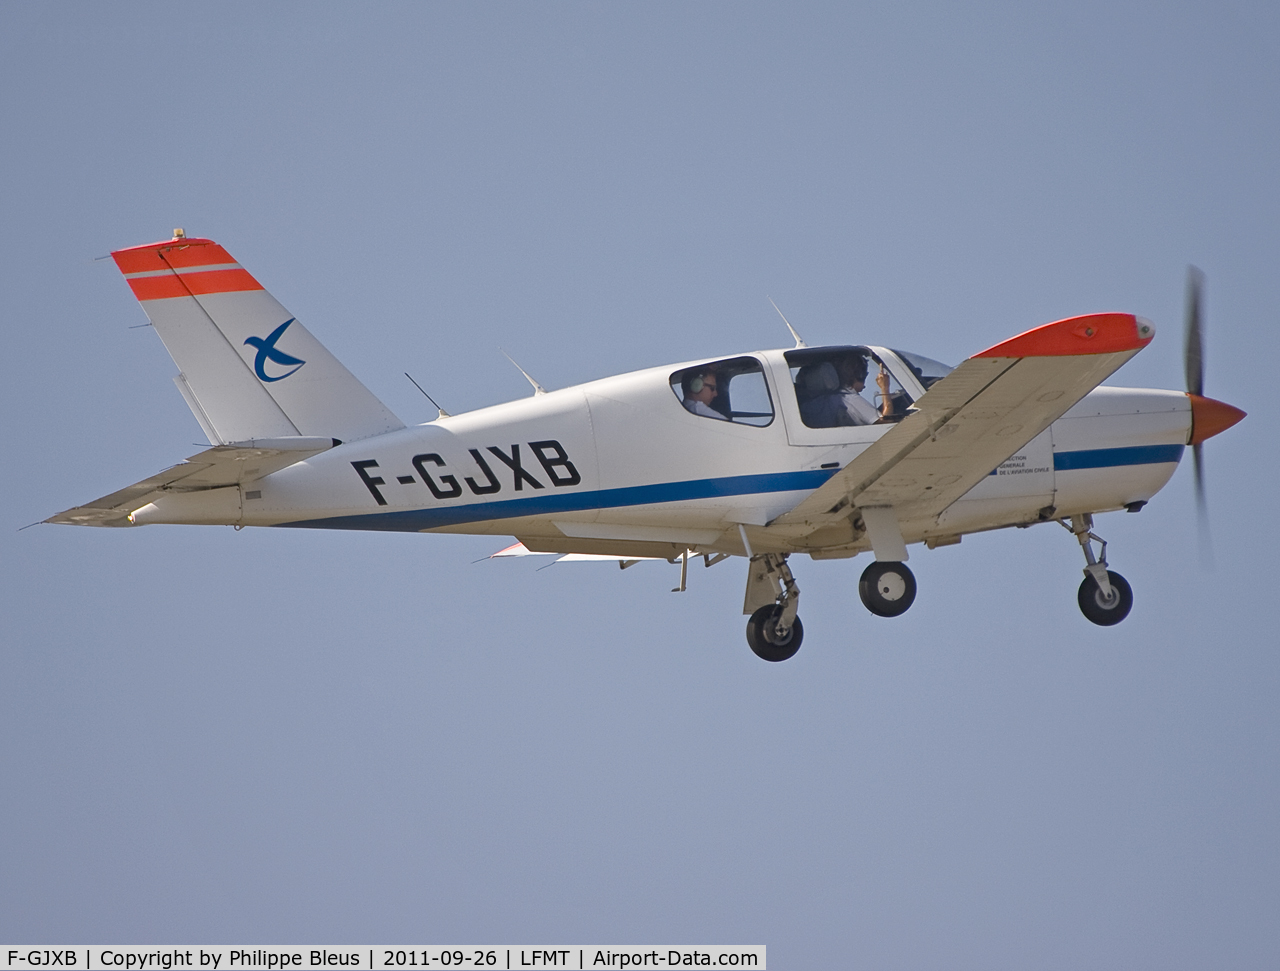 F-GJXB, 1991 Socata TB-20 C/N 1304, Climbing from rwy 13L. Beg your pardon for the light conditions which were too vertical at that time.